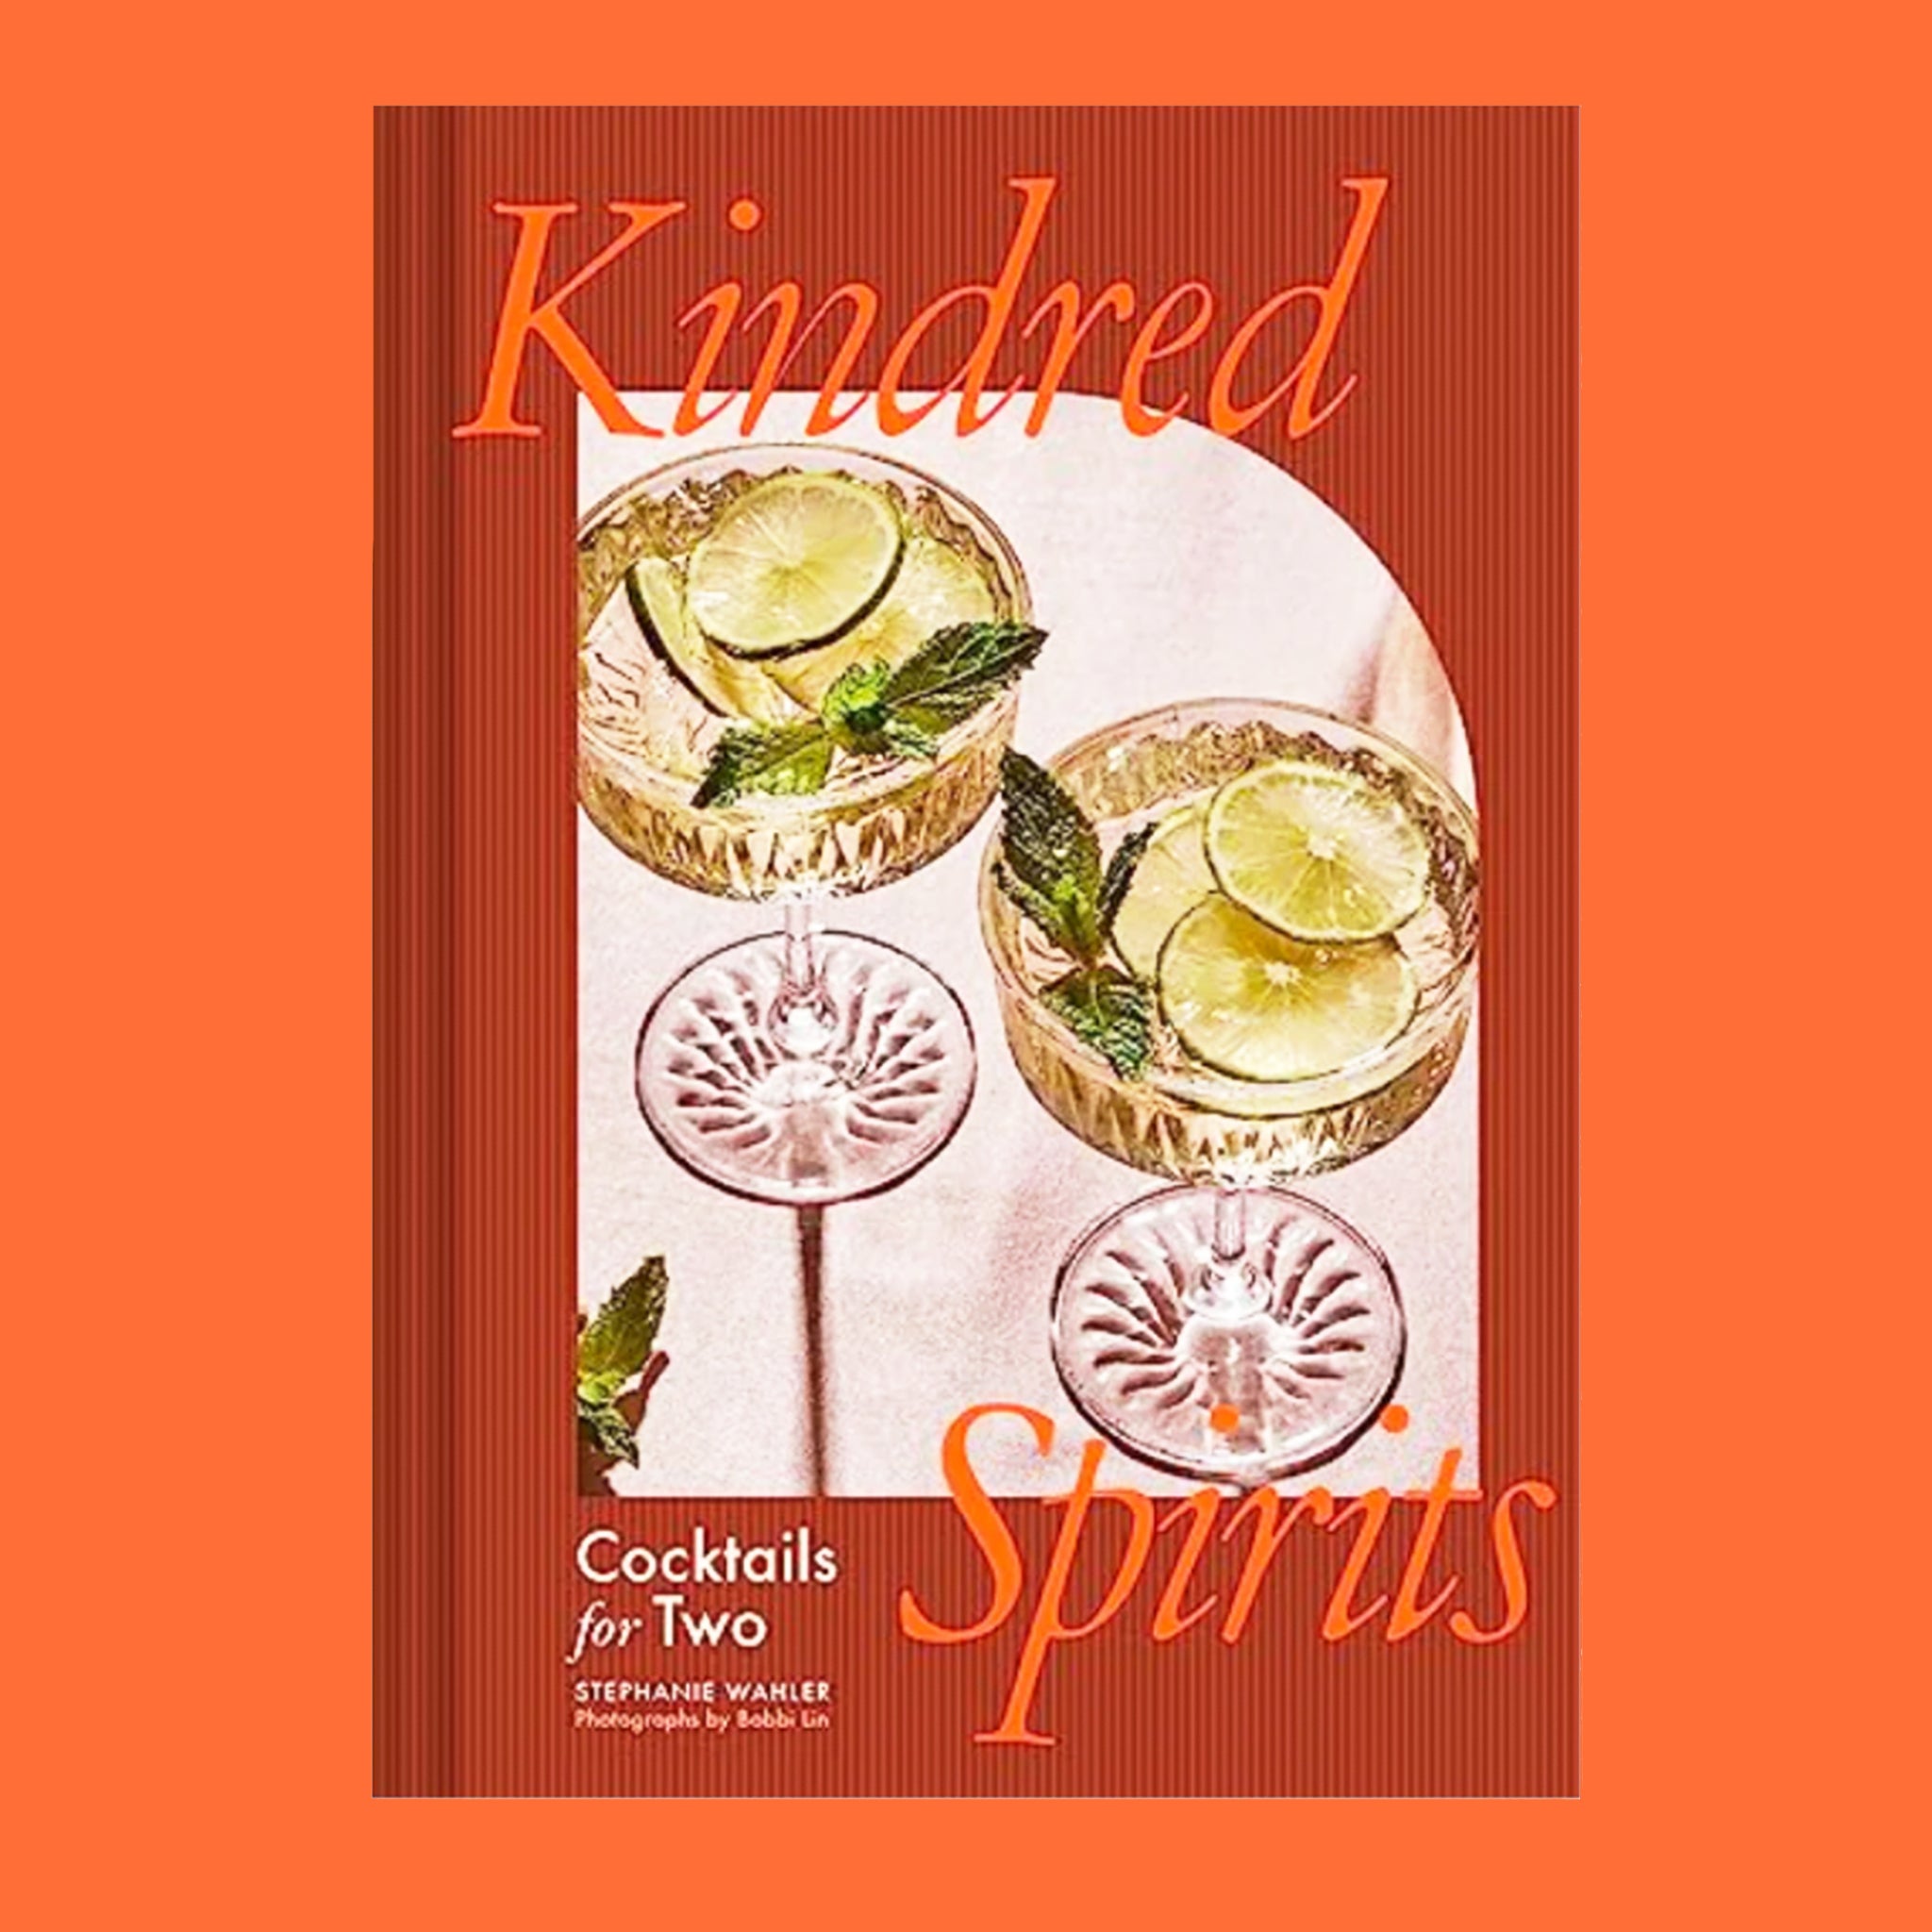 A burnt reddish orange book cover with a photograph of two beverages in coupe glasses and the title that reads, &quot;Kindred Spirits&quot;.